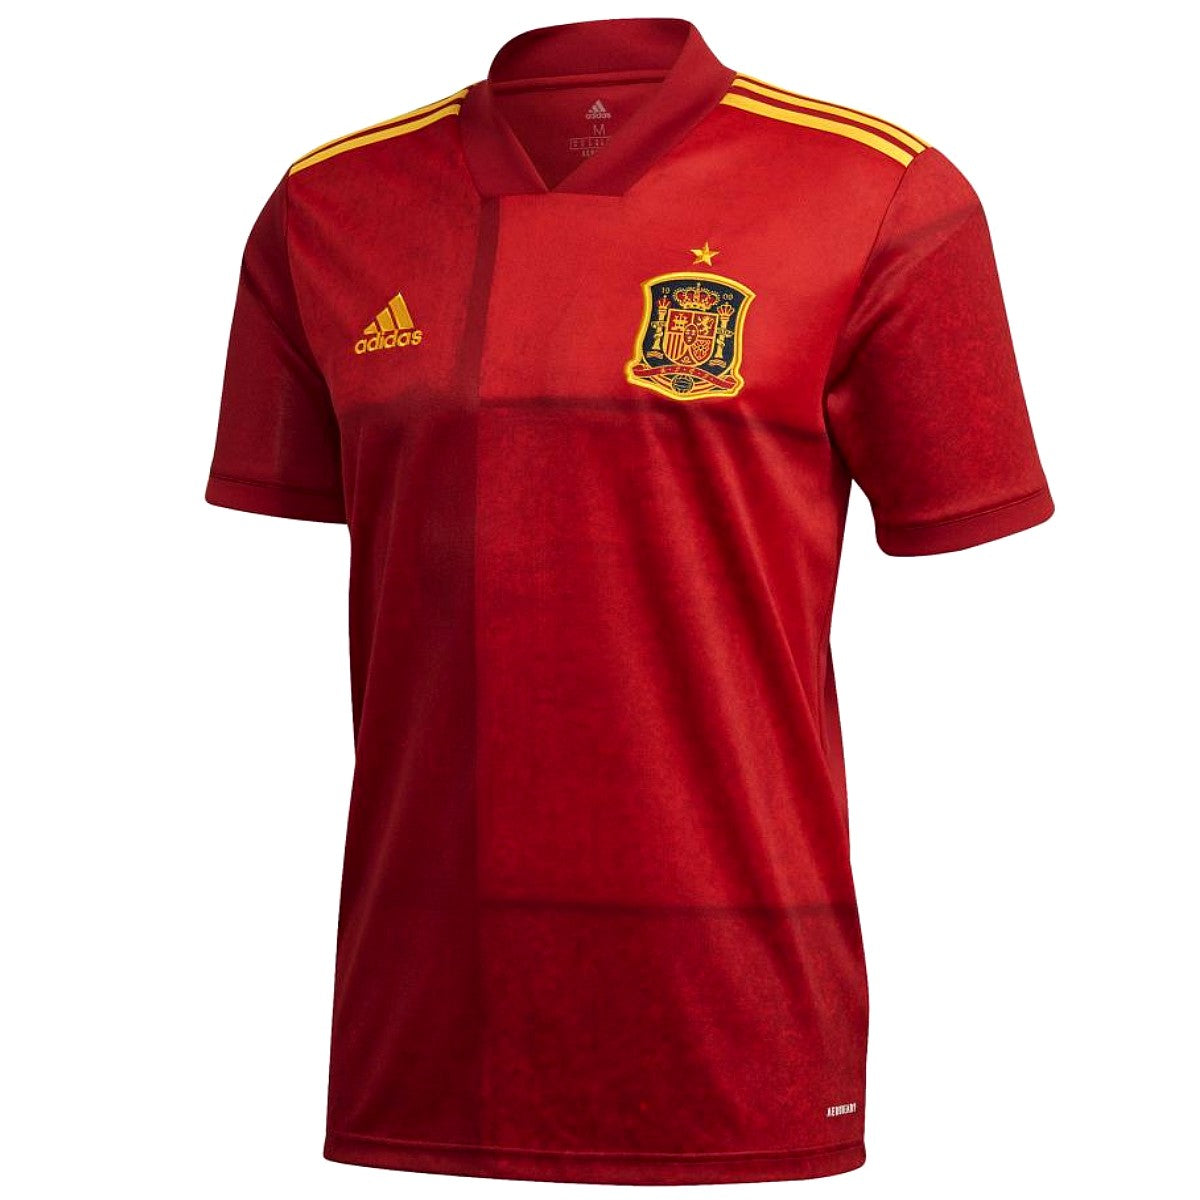 Spain national team Home soccer jersey 2021/22 Adidas –